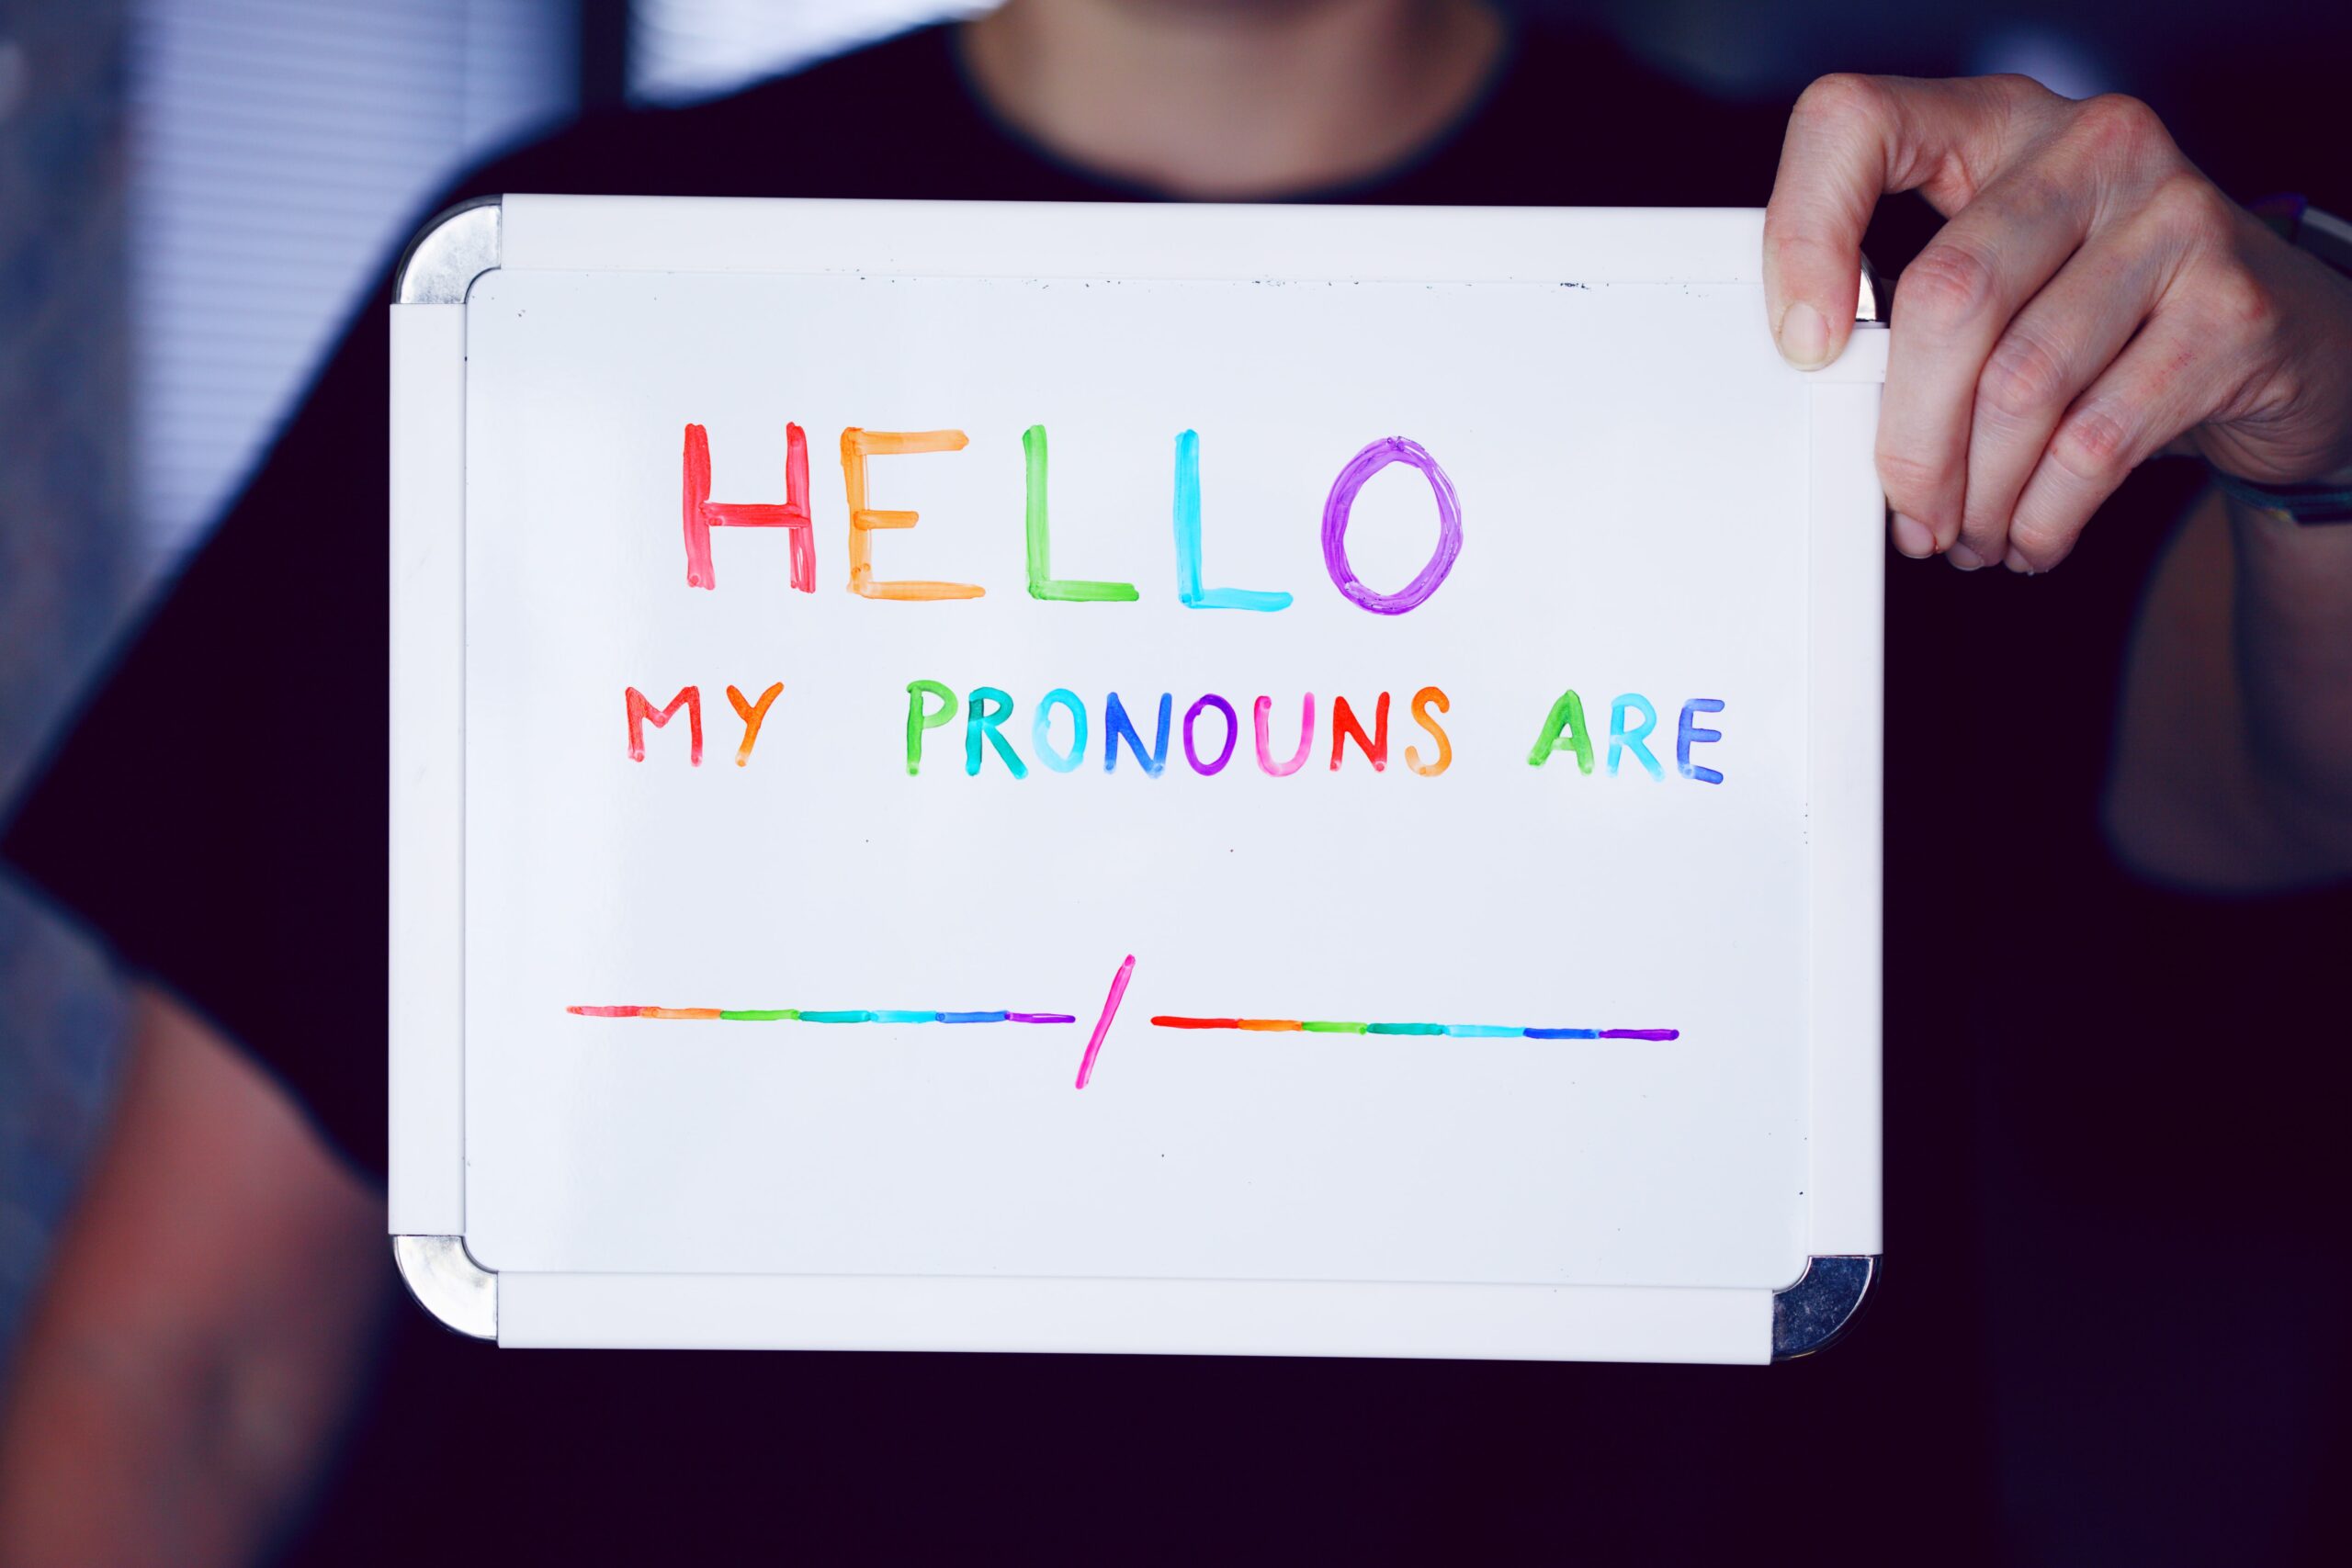 Hello. My pronouns are ___/___ (written in rainbow colors on dry erase board that a faceless person is holding)